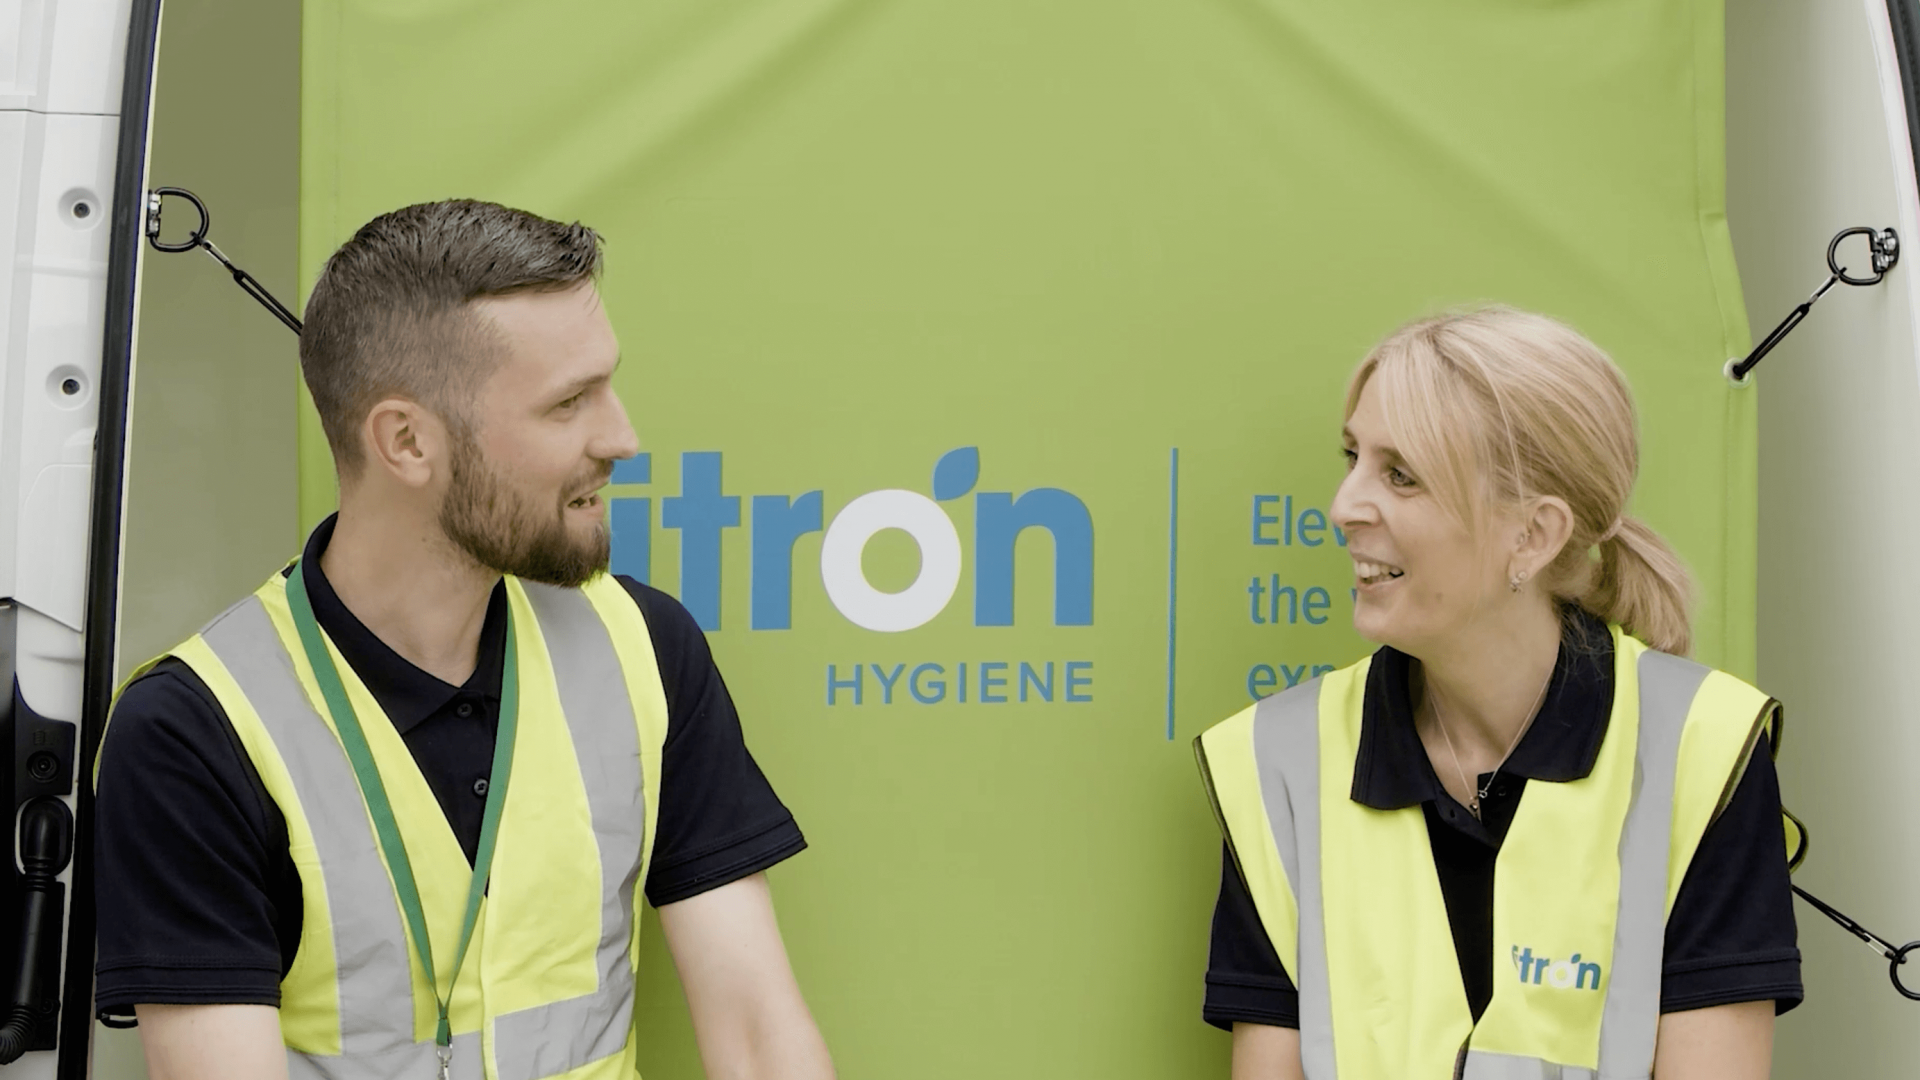 2 workers in the citron hygiene induction video